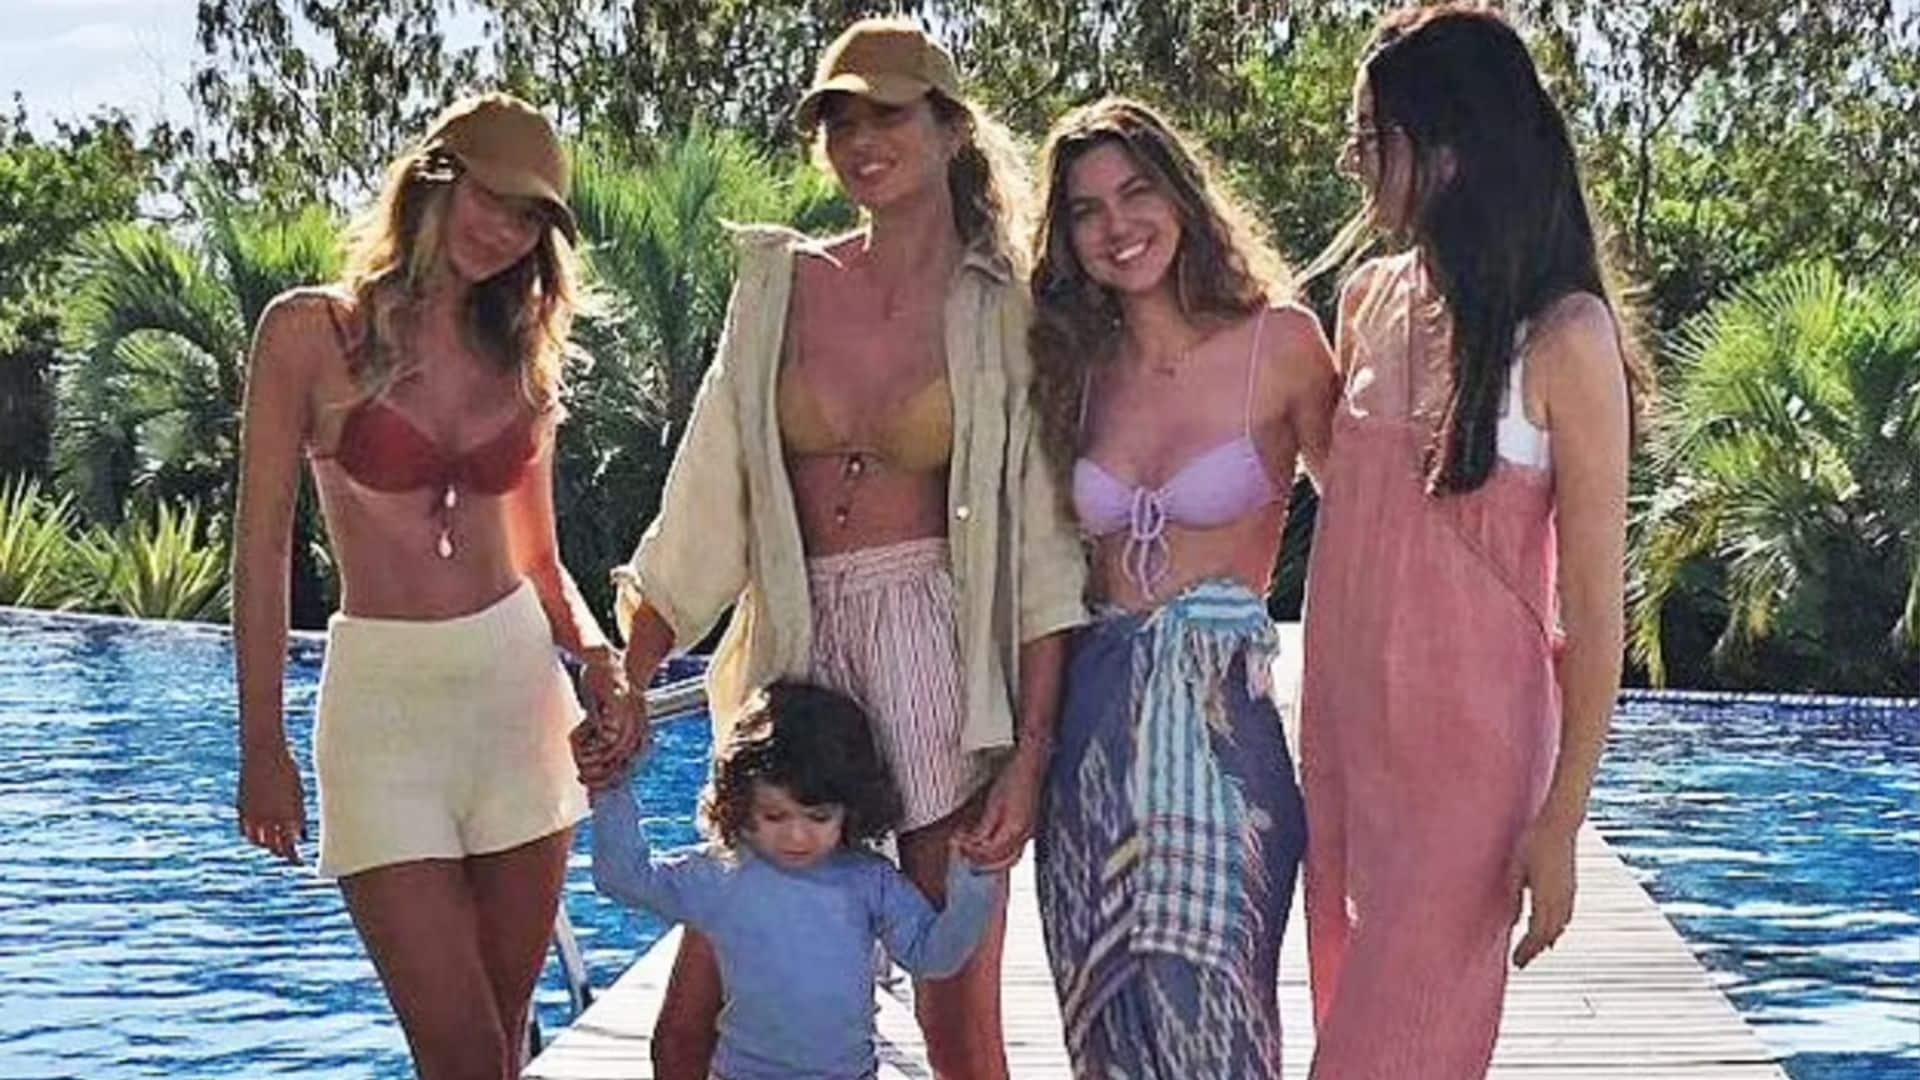 Gisele Bündchen shares a stunning swimsuit snap with her sisters